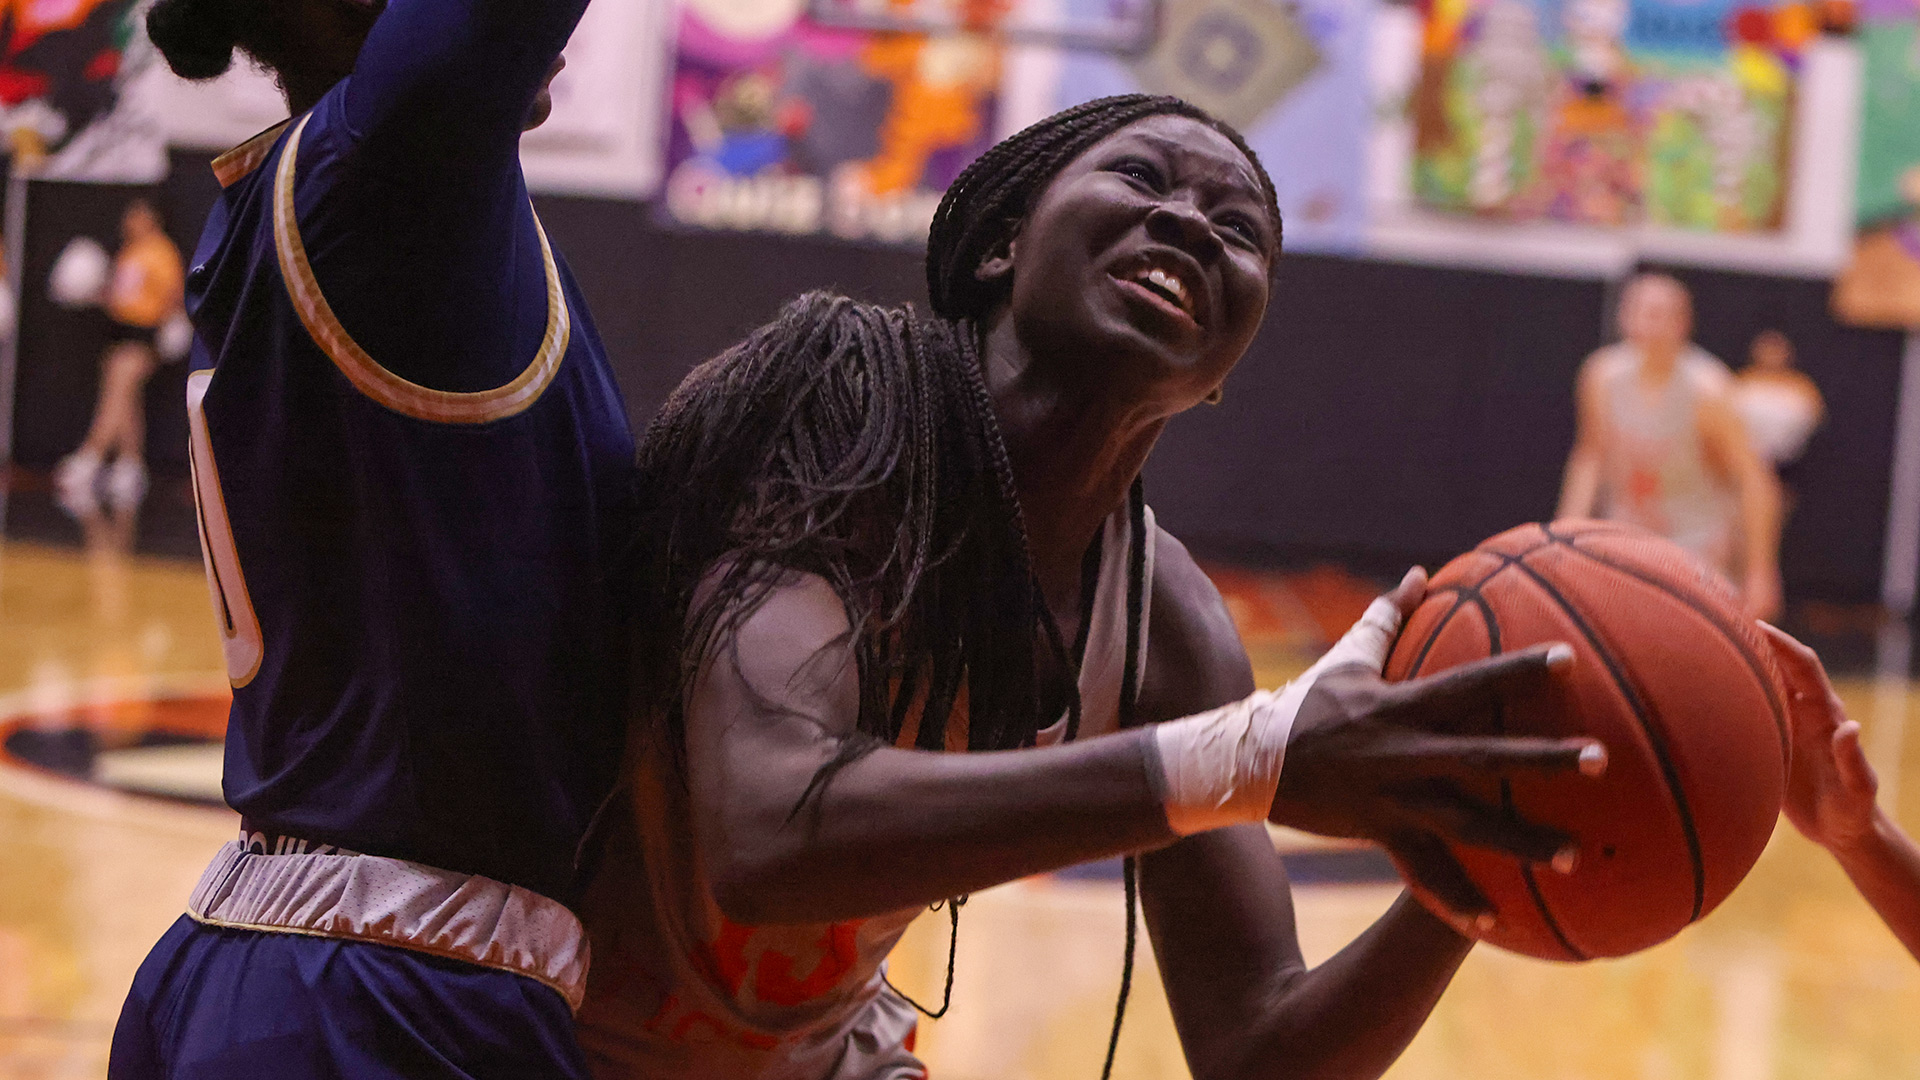 Mbengue has a night to remember in the Lady Tigers? 75-59 win